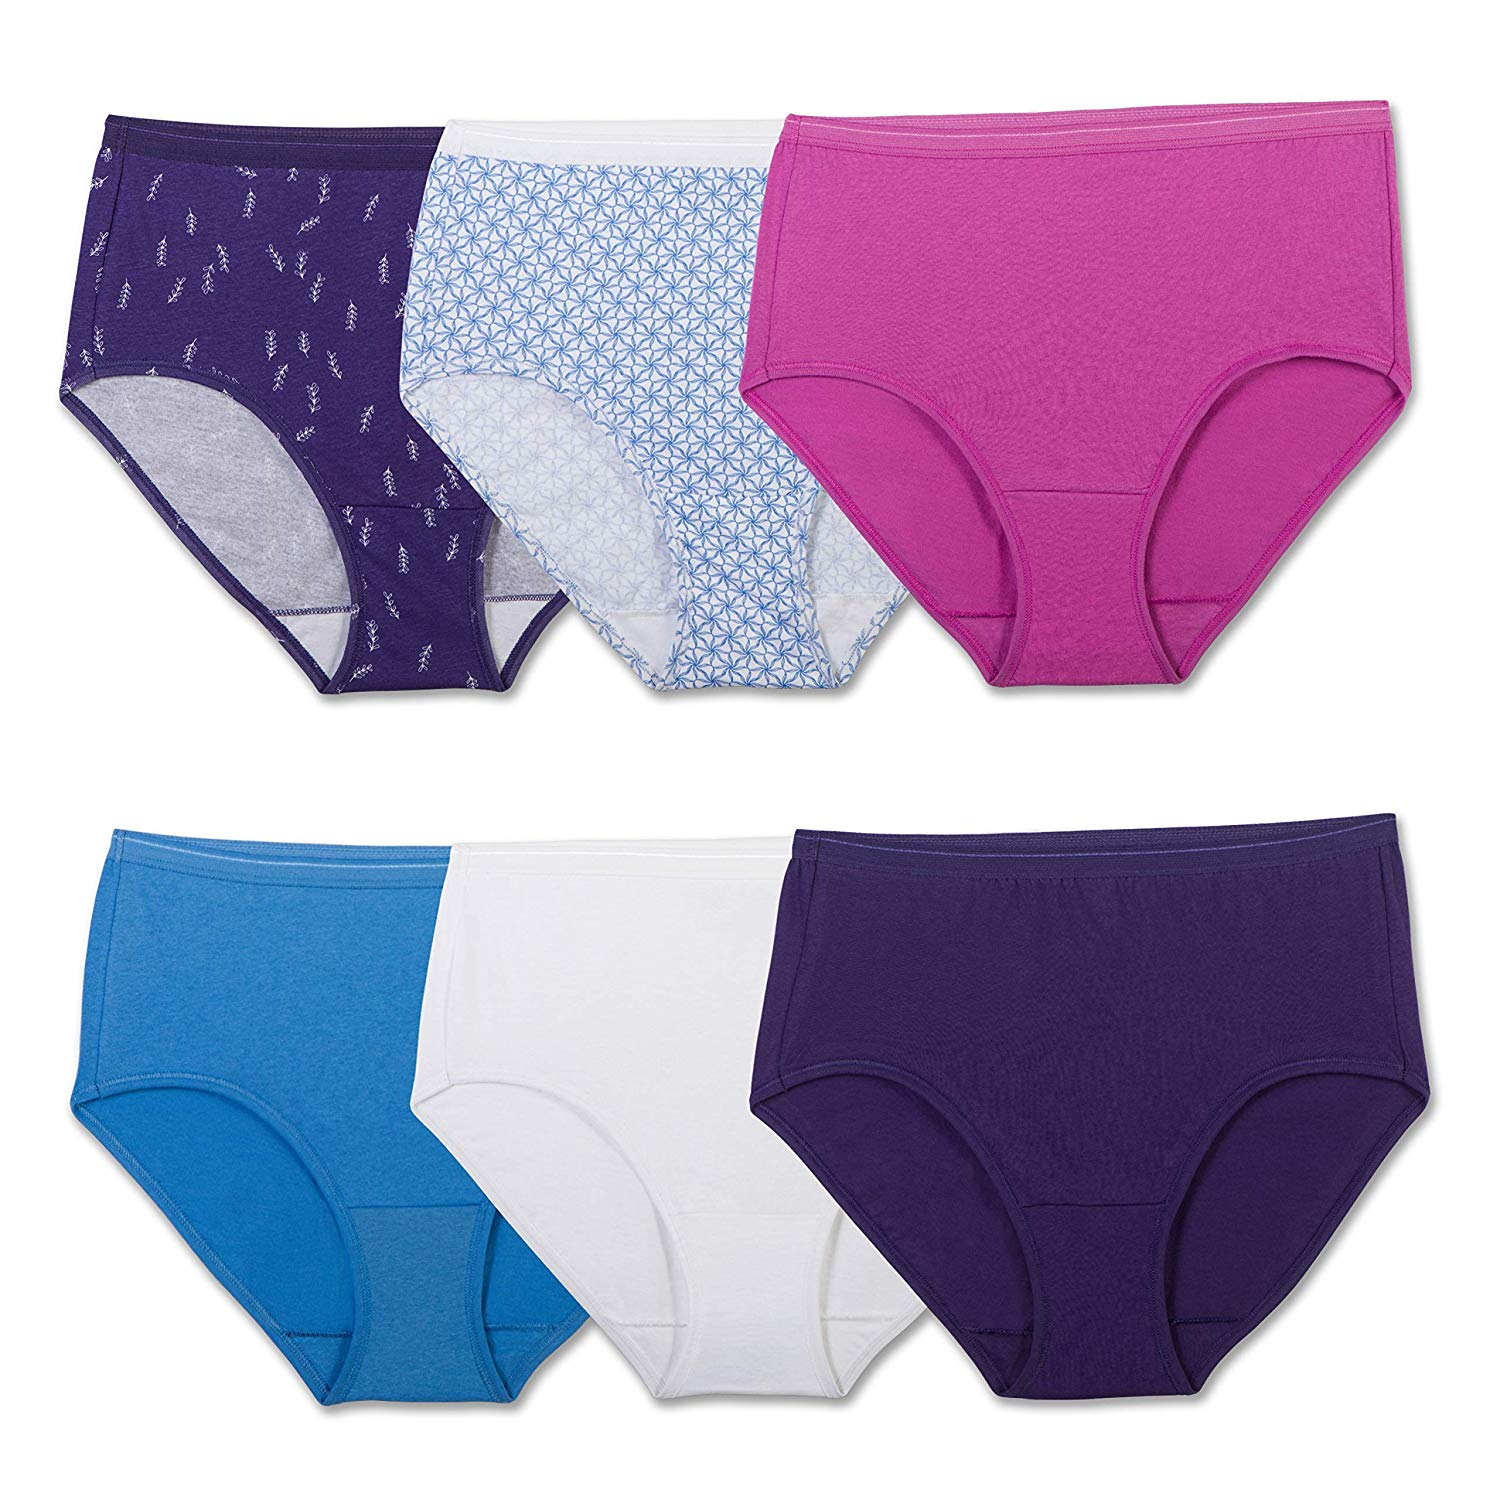 Fruit of the Loom Women's Cotton Brief Panties, Large / 7,, Blue, Size ...